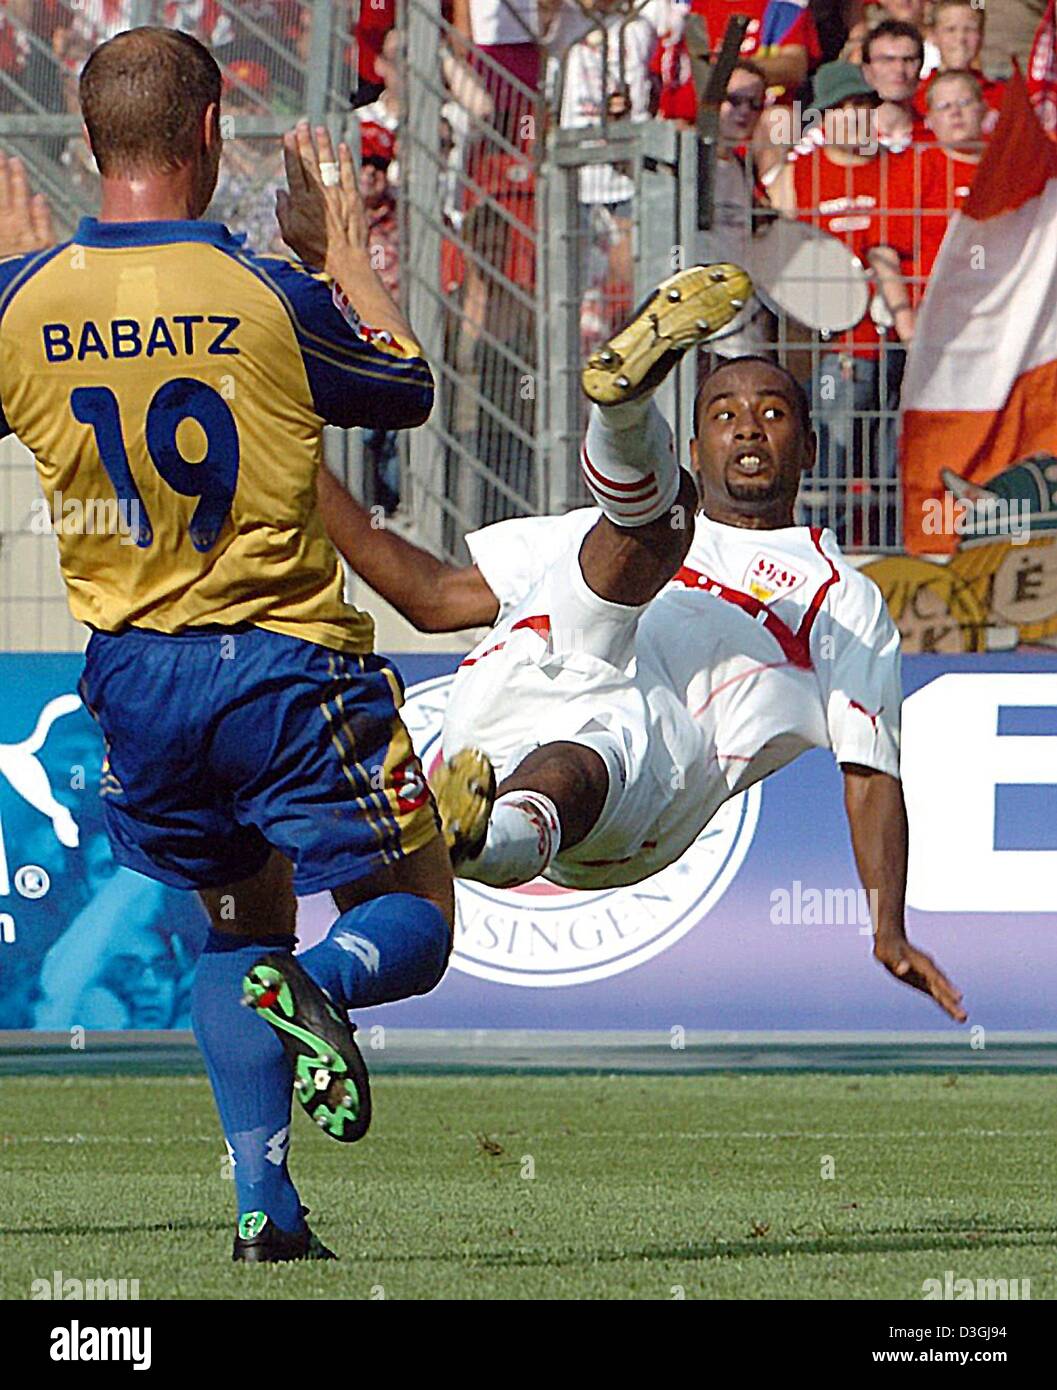 (dpa) - Stuttgart's Cacau reaches the ball before Christof Babatz (L) from Mainz during the Bundesliga soccer game opposing VfB Stuttgart and FSV Mainz 05 in Stuttgart, Germany, 8 August 2004. Stuttgart wins the first round game 4-2 and is now spearheading the league table. Stock Photo